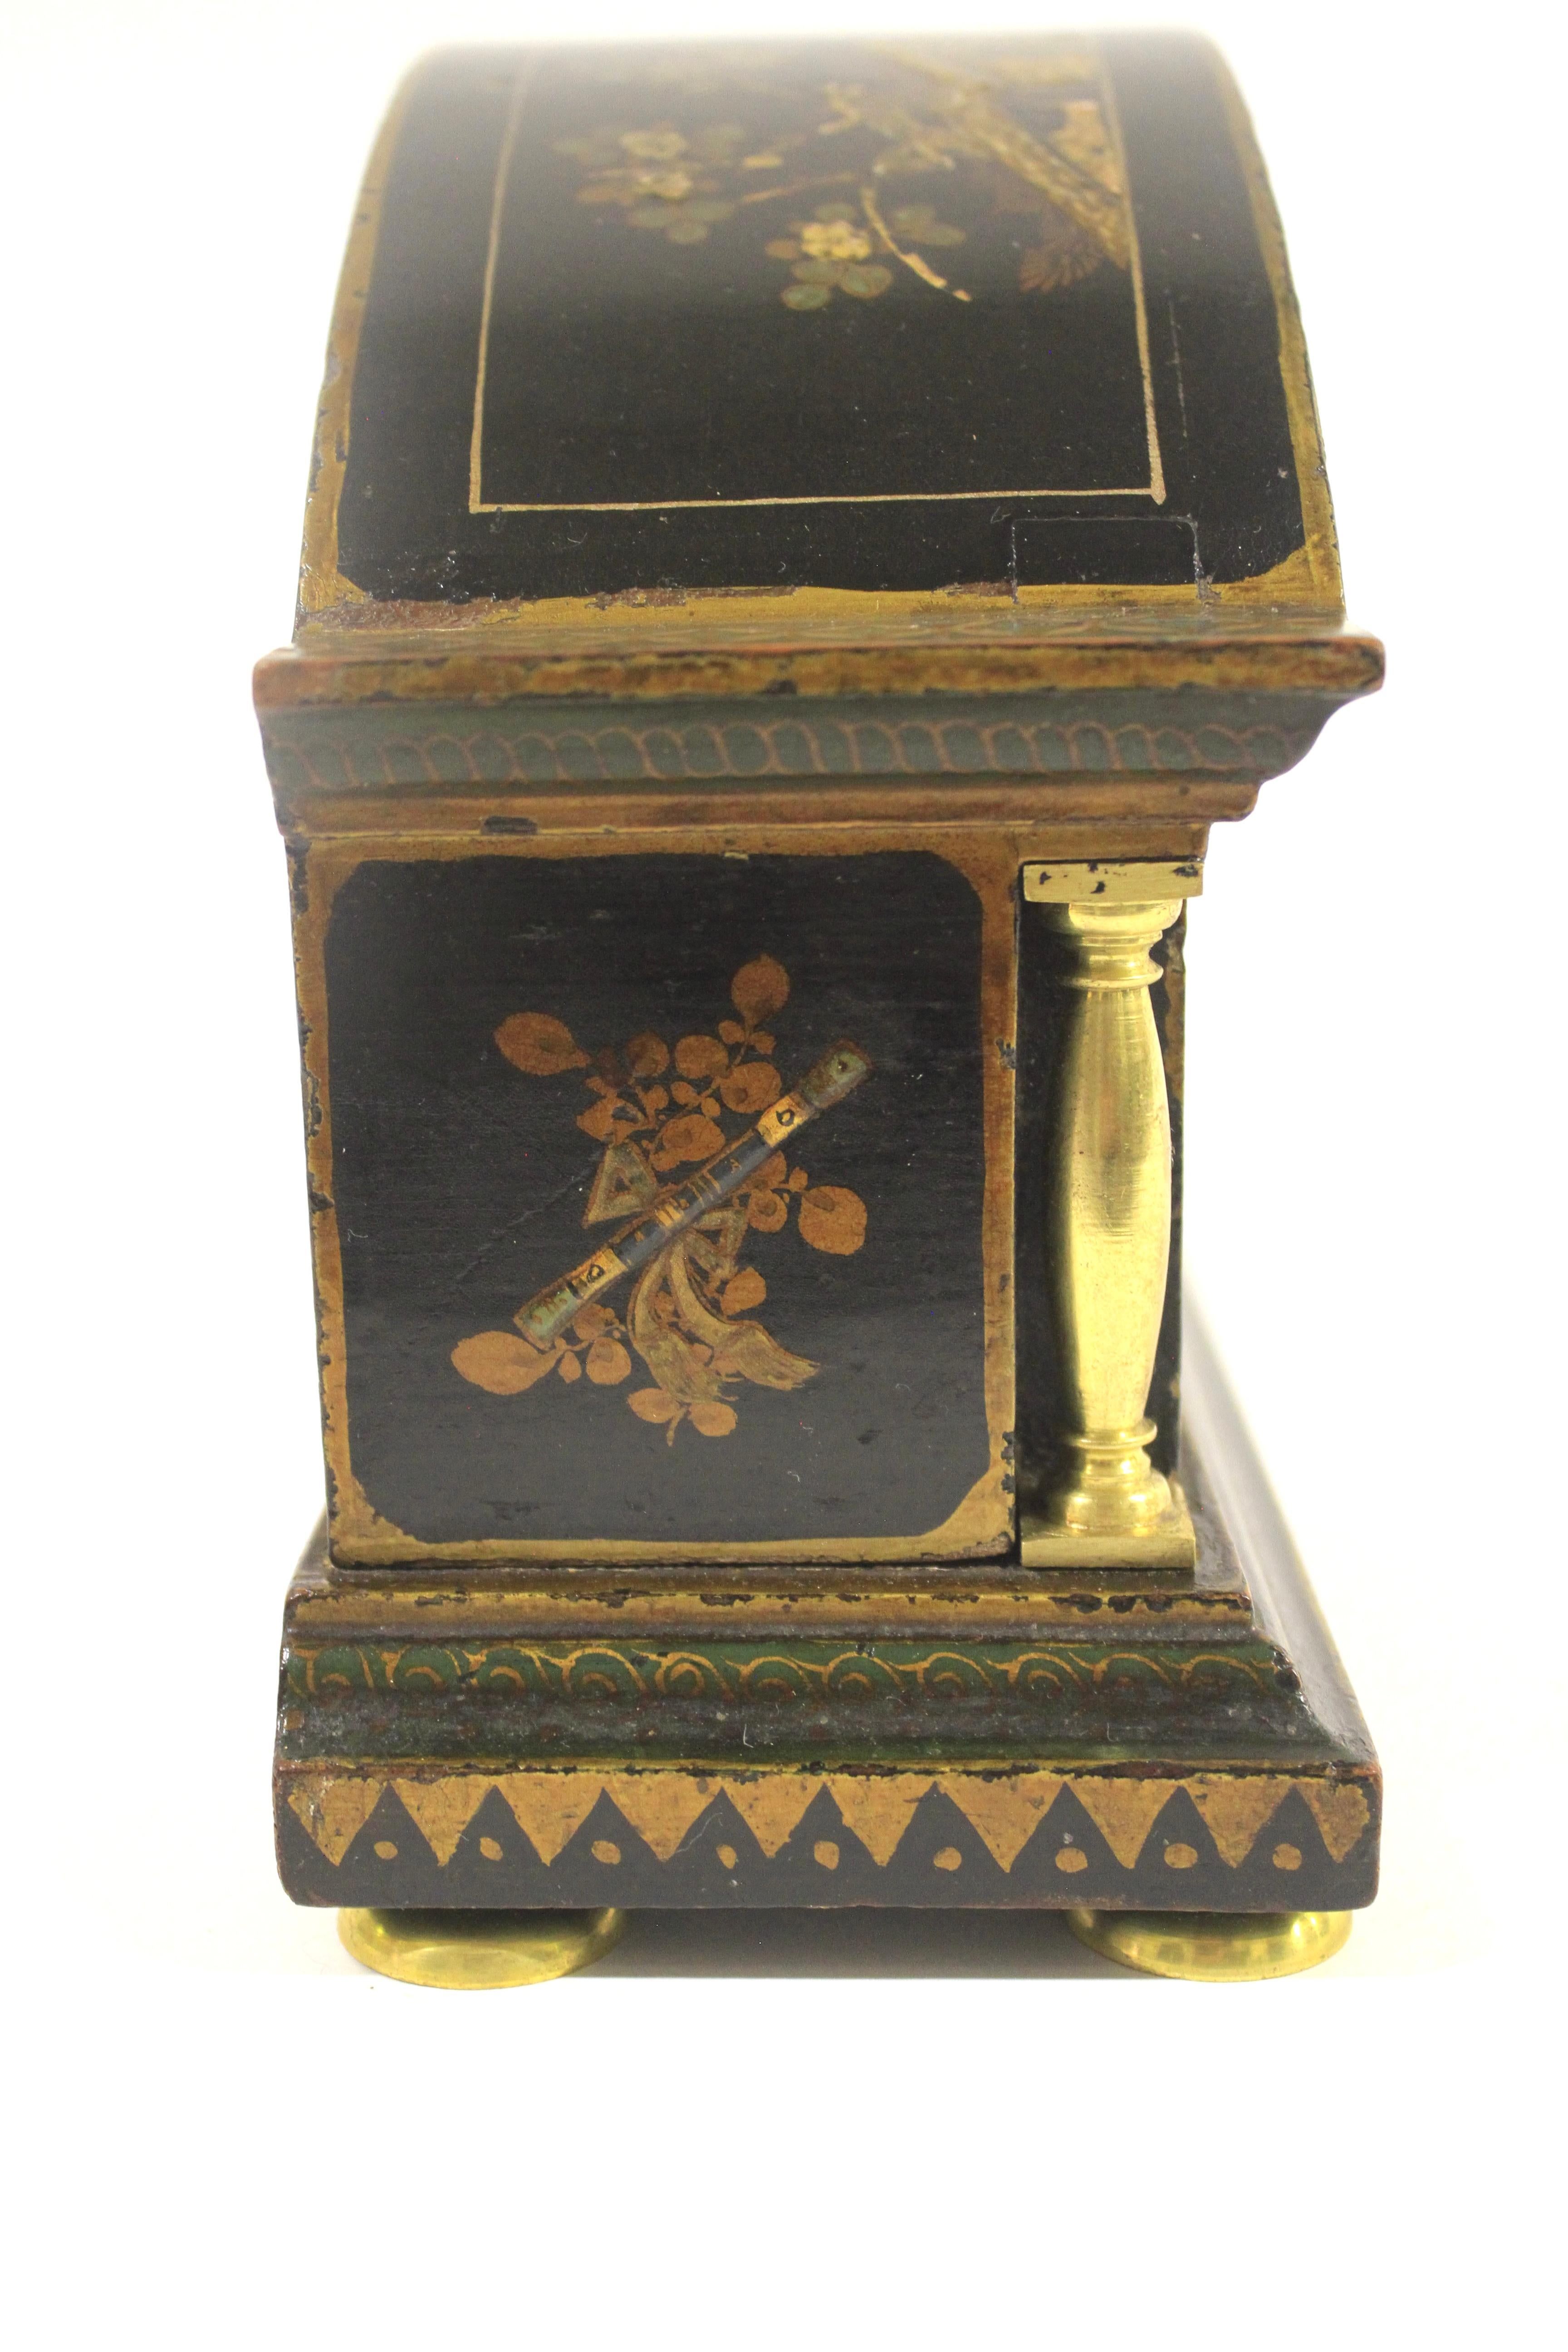 Chinoiserie Decorated Mantel Clock circa 1920s
Black Background with gilt decoration
Dome shaped top , with gilt brass columns each side. 
Cream enamel dome face ,
Bevelled dome glass, gilt brass rim,
French 8 day movement, recent clean &